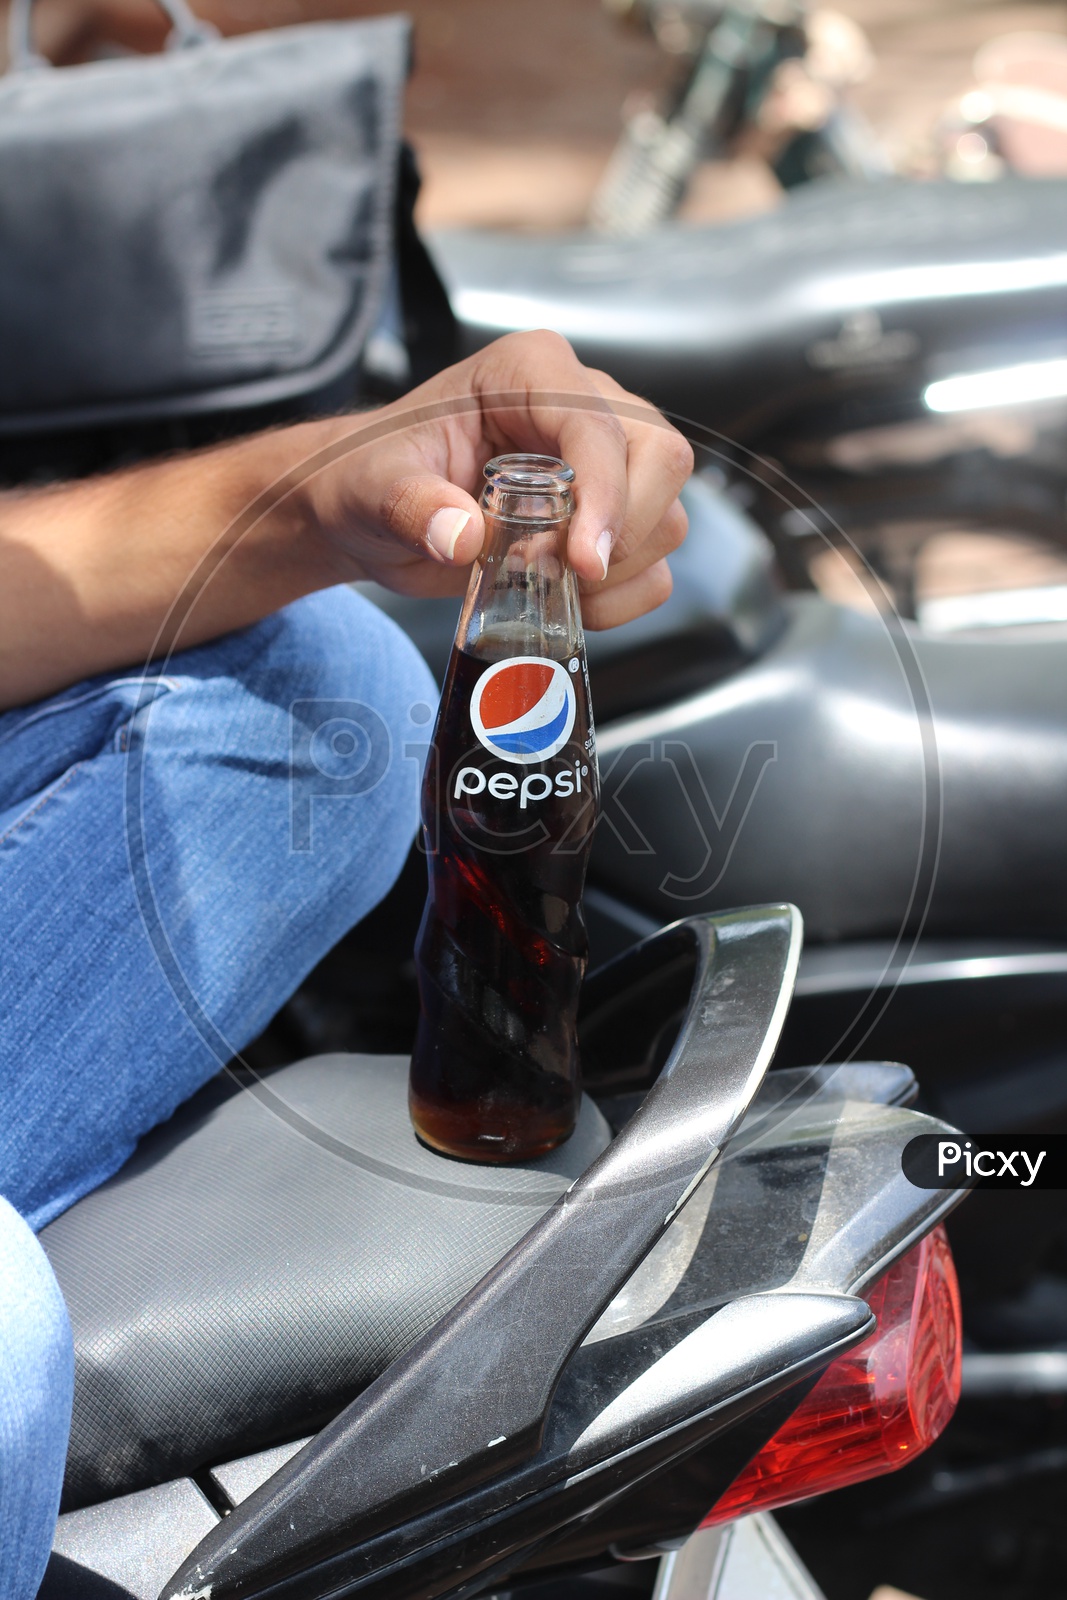 Pepsi Soft Drink or cool Drink Bottle holding in Hand